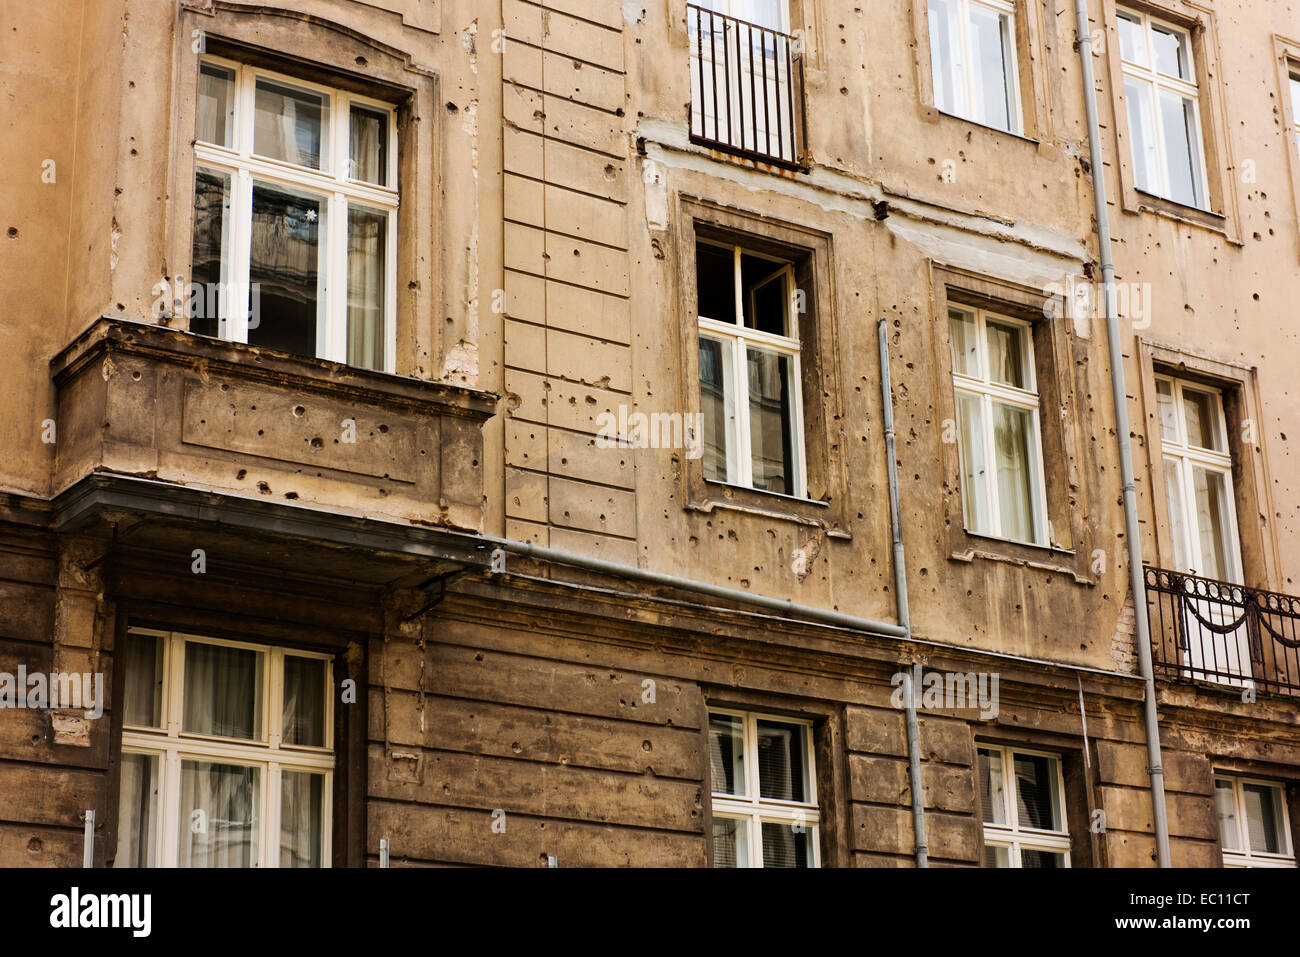 One exterior wall of a building in Mitte showing bullet holes from World War 2 has been intentionally left unrestored. Stock Photo